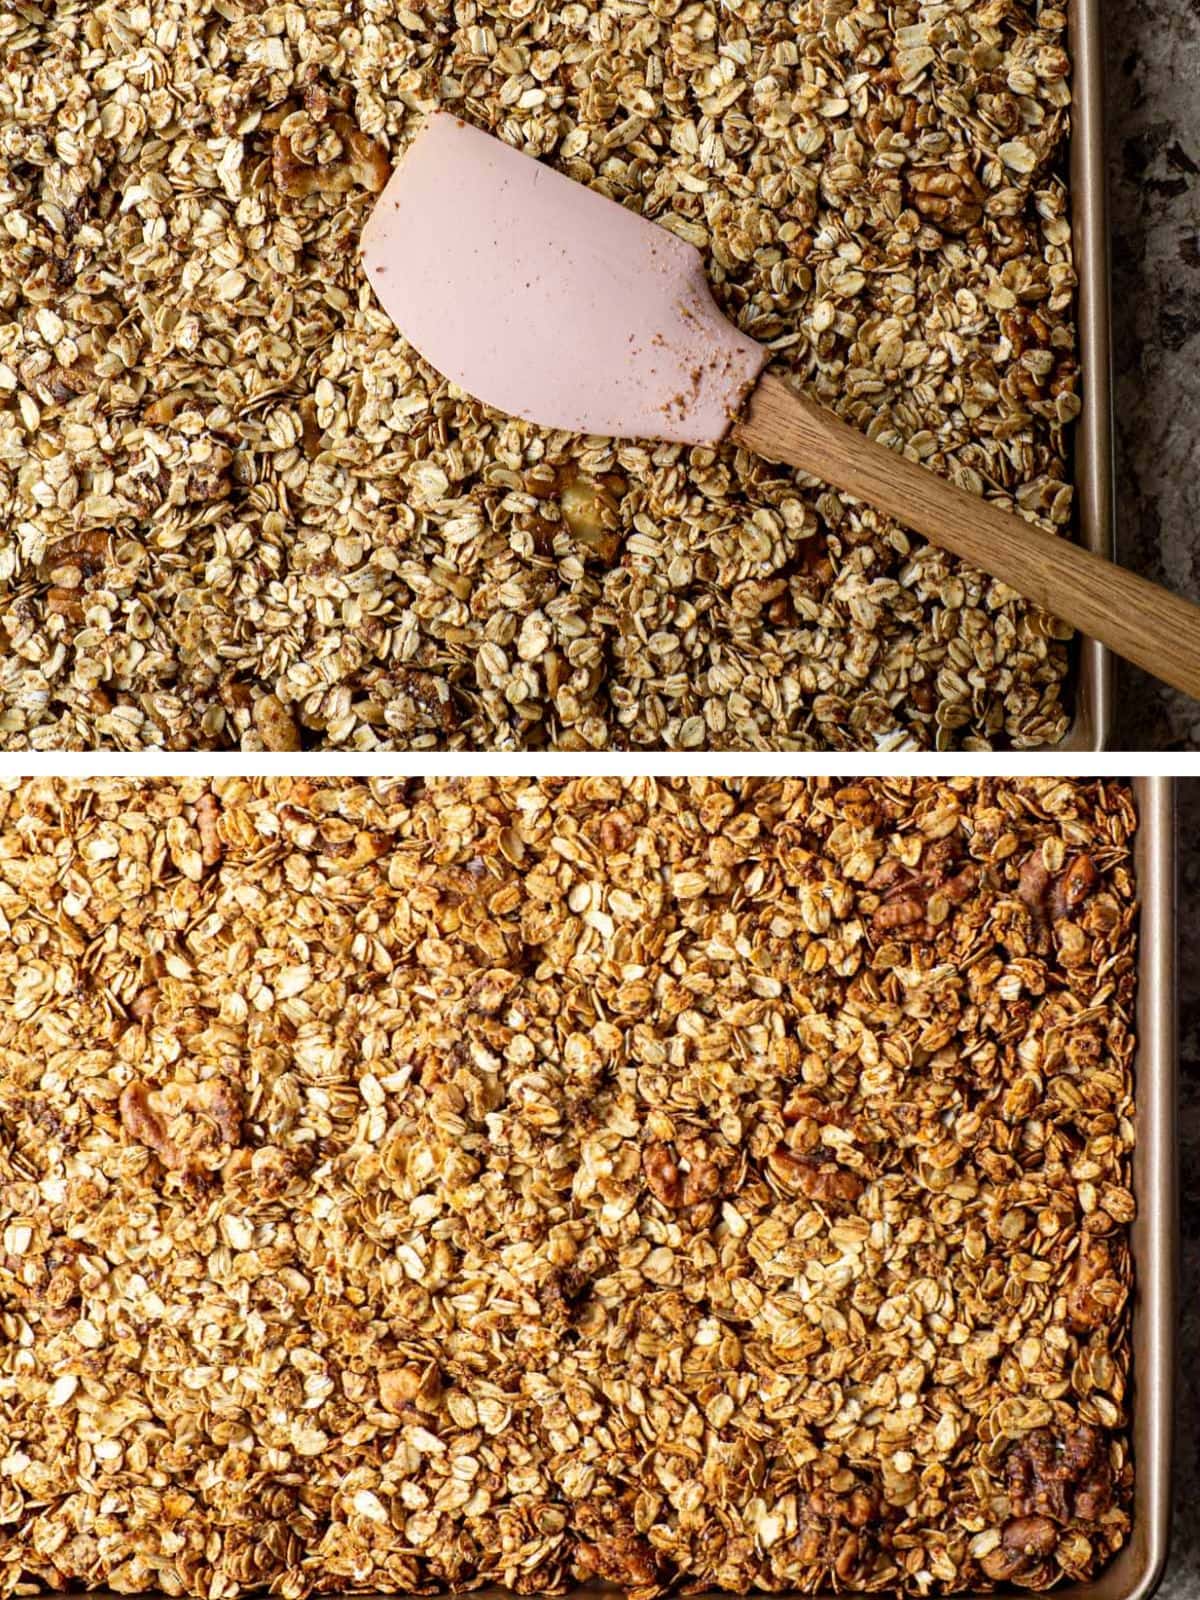 Honey granola mixture spread out on a sheet pan before and after baking.